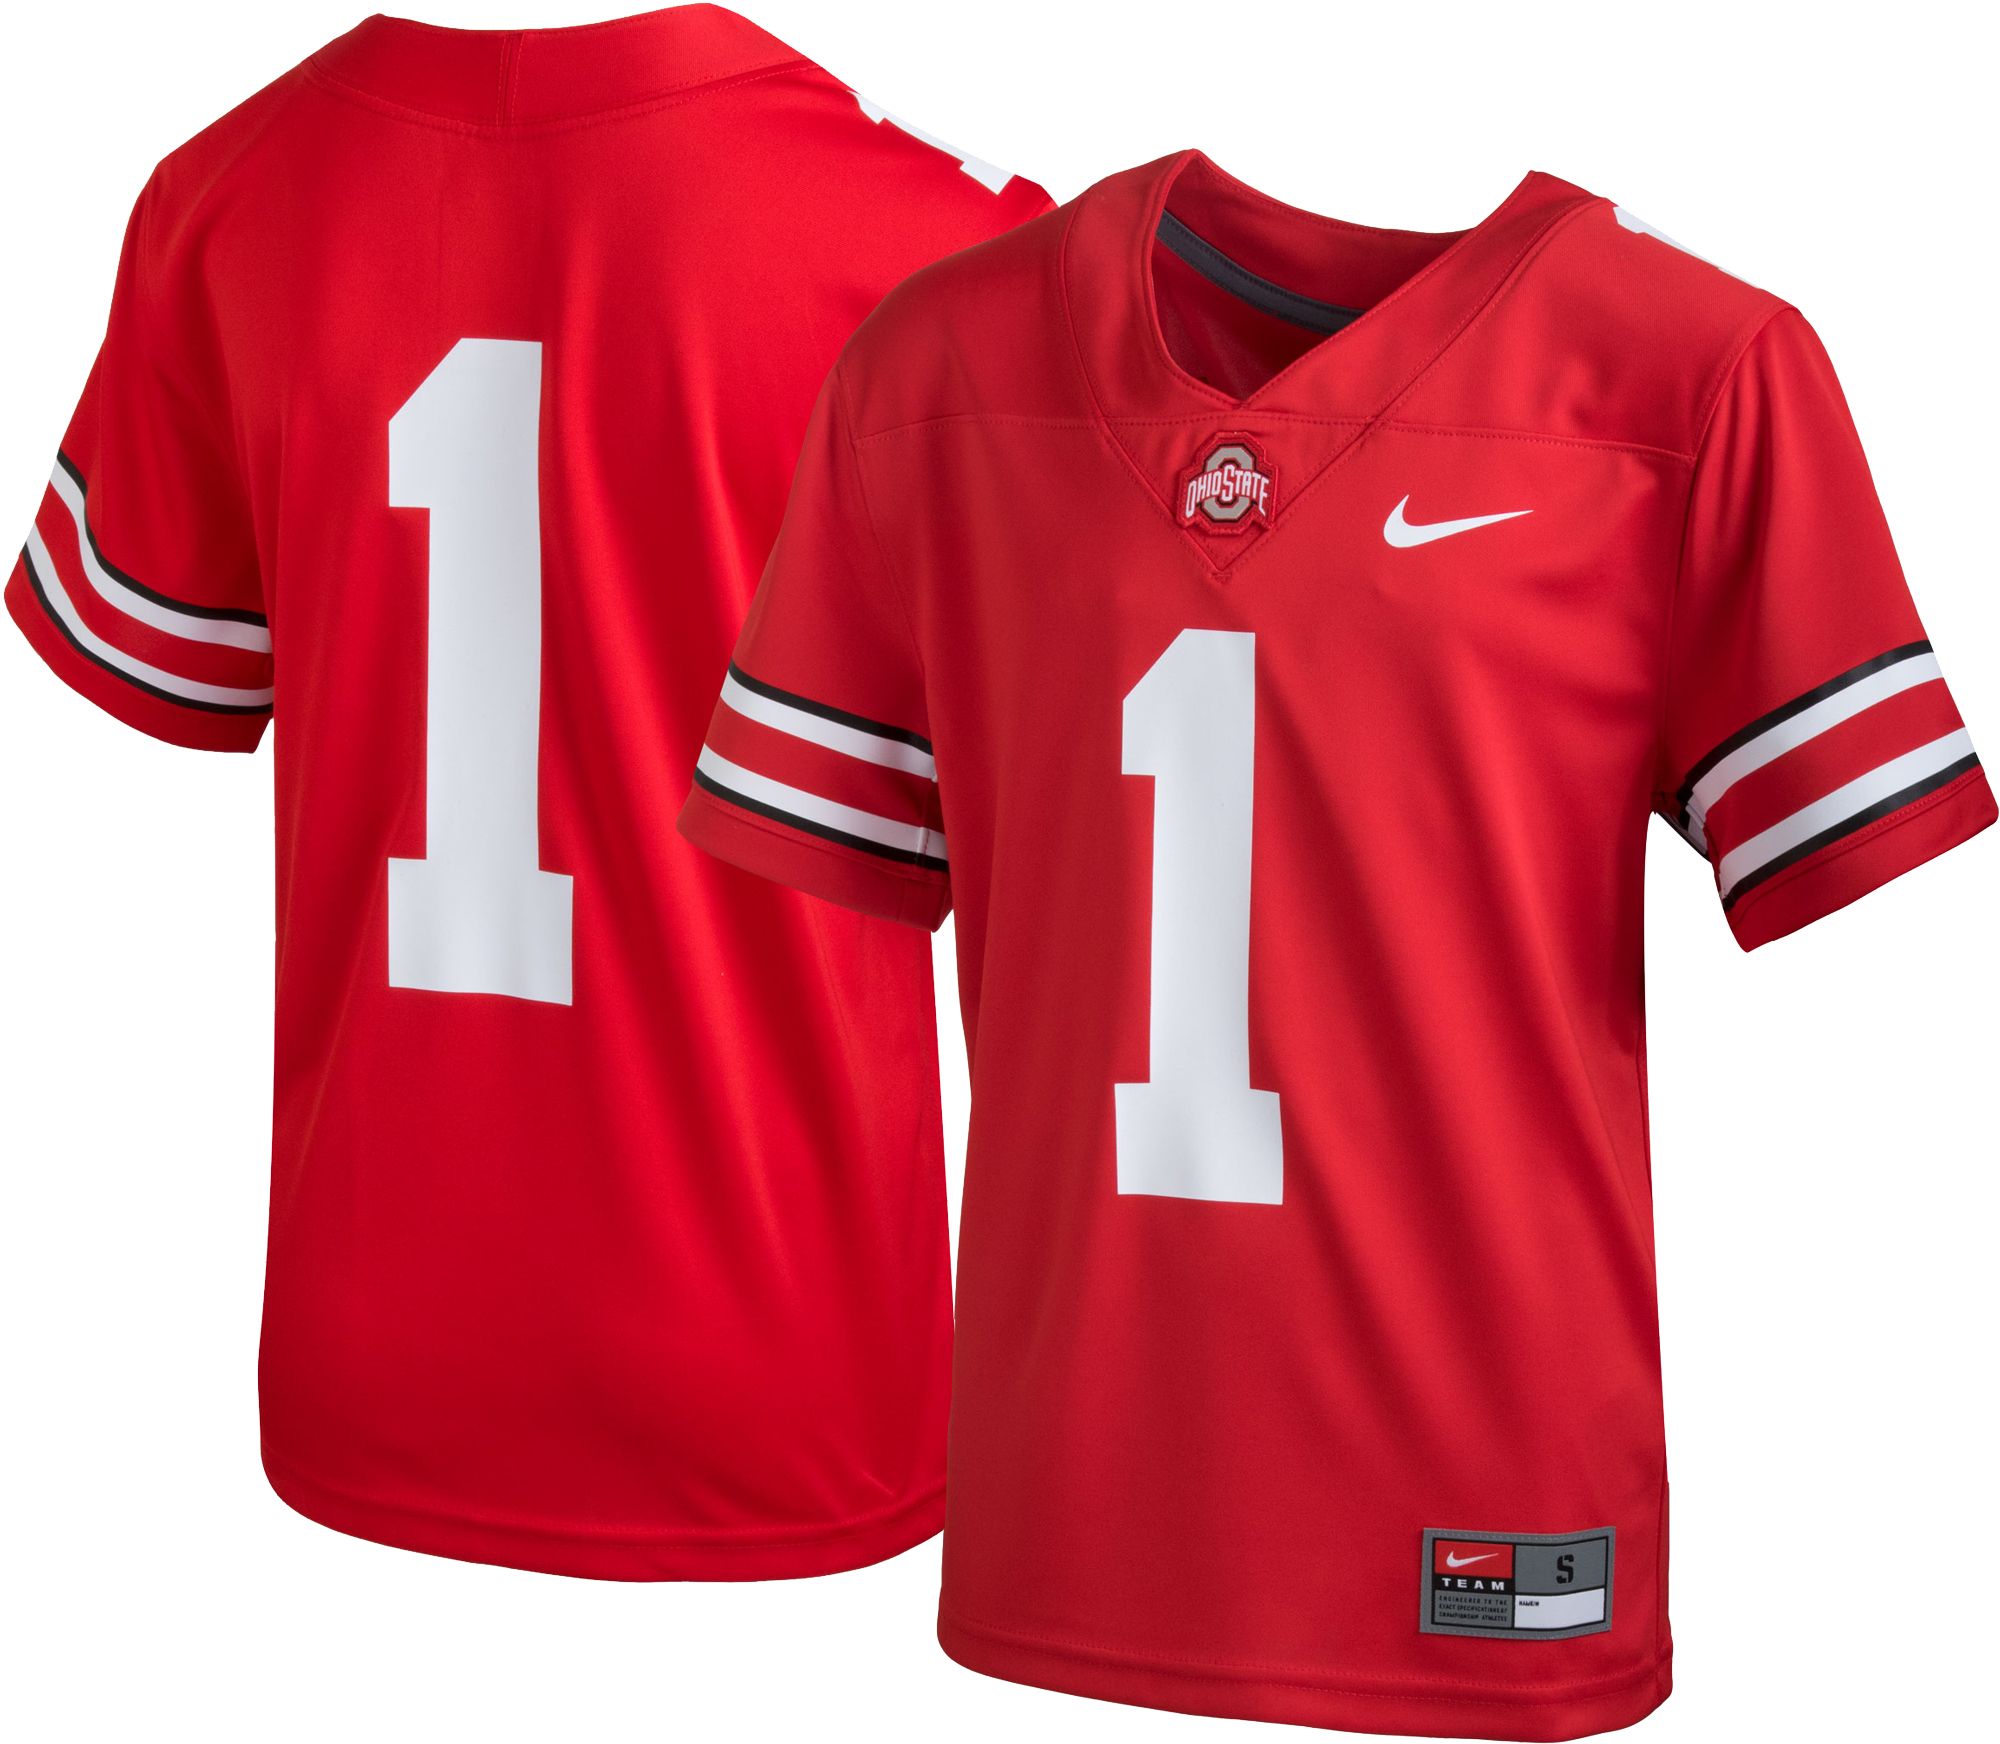 3t ohio state jersey